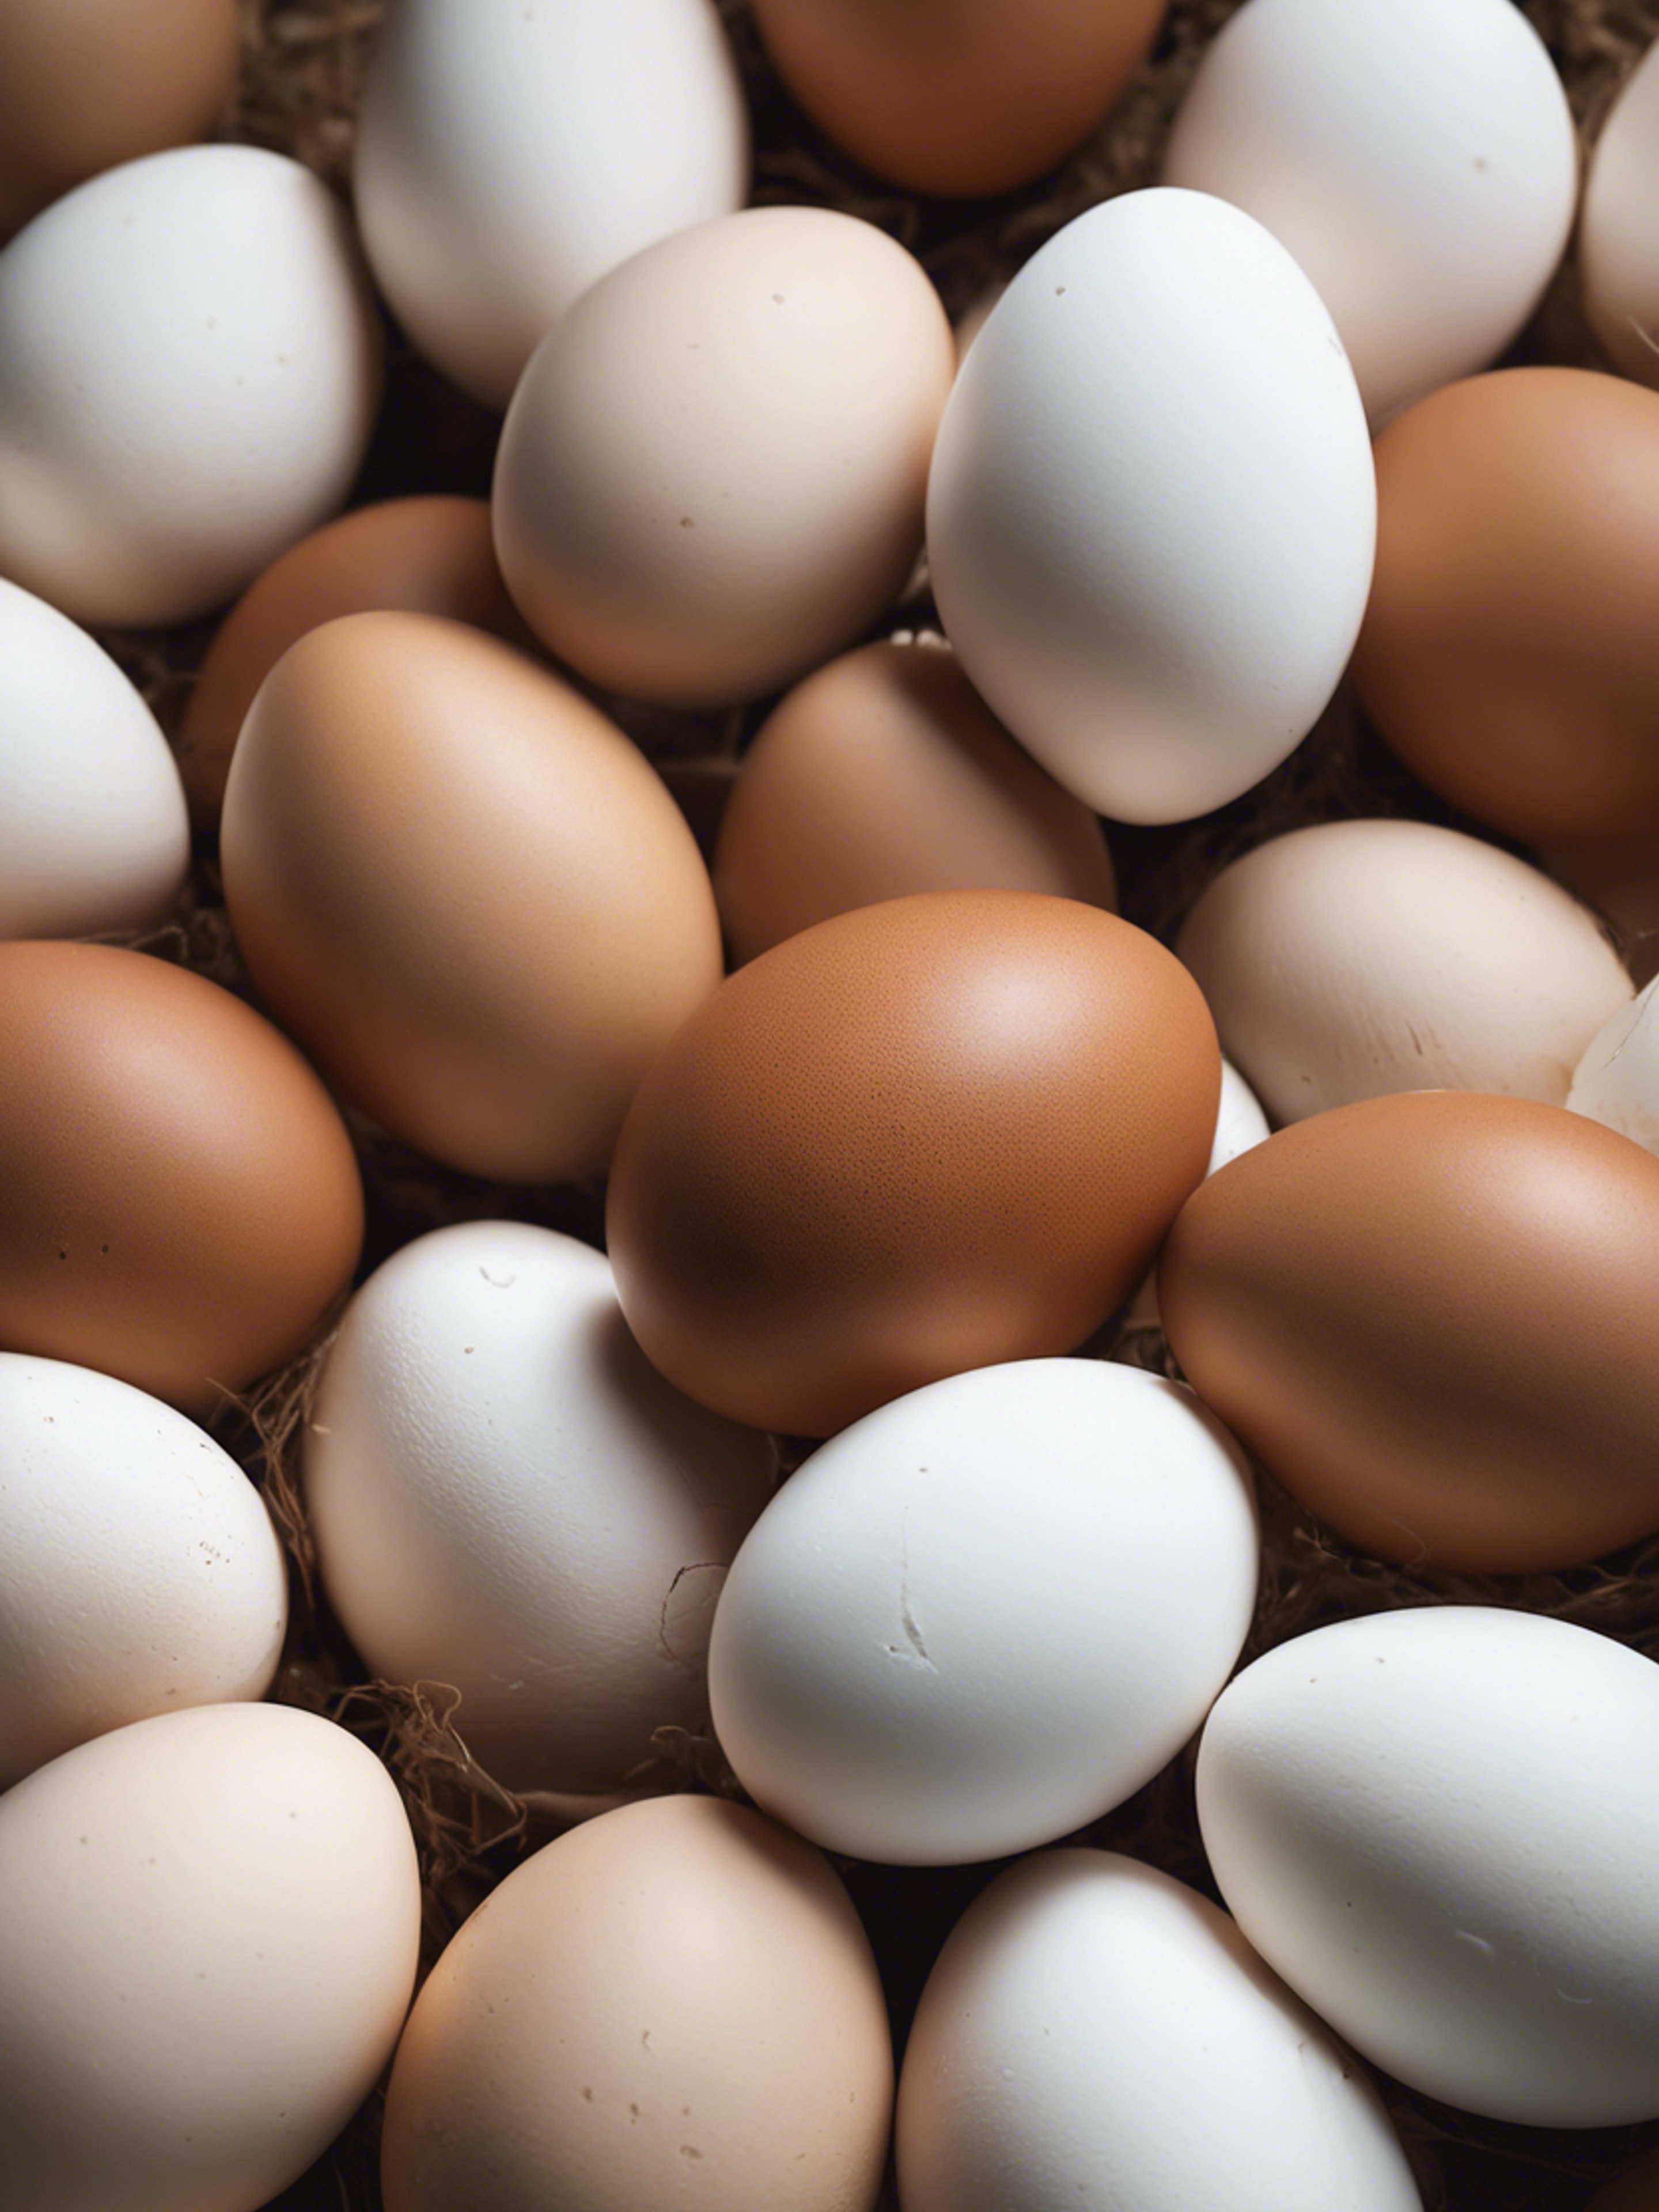 Still life of farm fresh eggs in various shades of brown and white.壁紙[c7c6c41e8fee478abe8f]